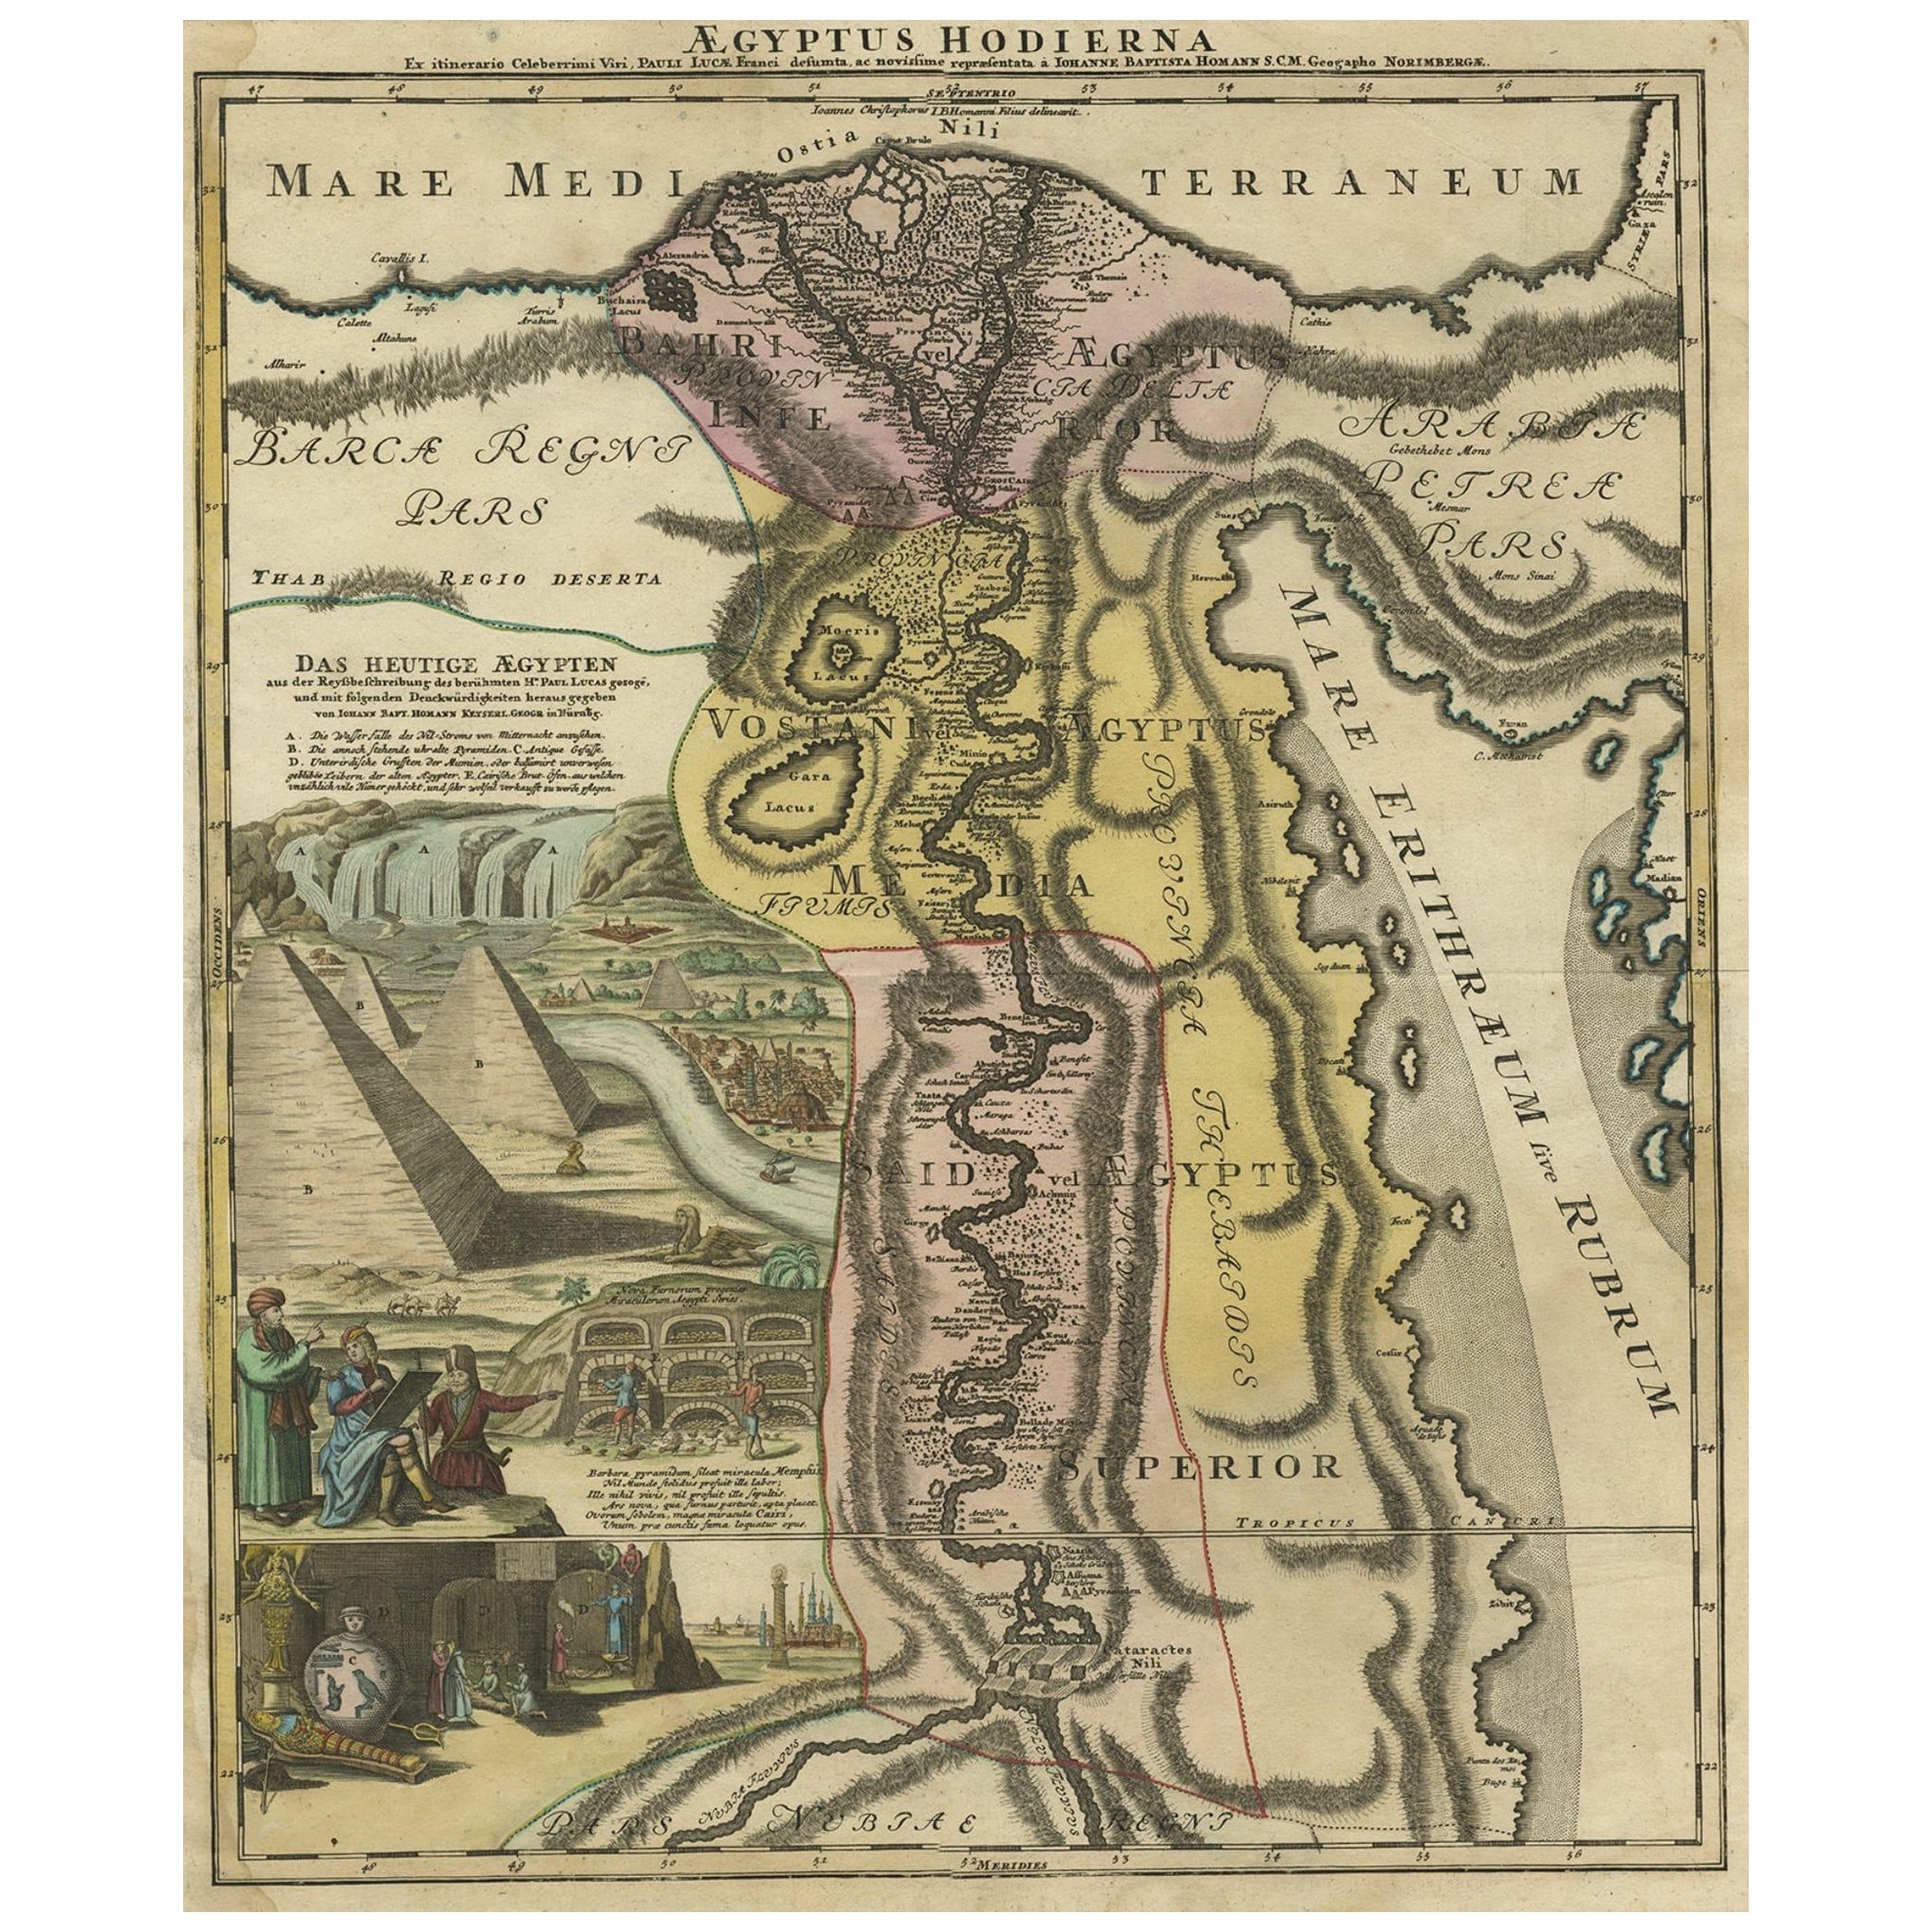 Antique Map of Egypt and the Nile River with Sphinx, Pyramids, Etc, c.1720